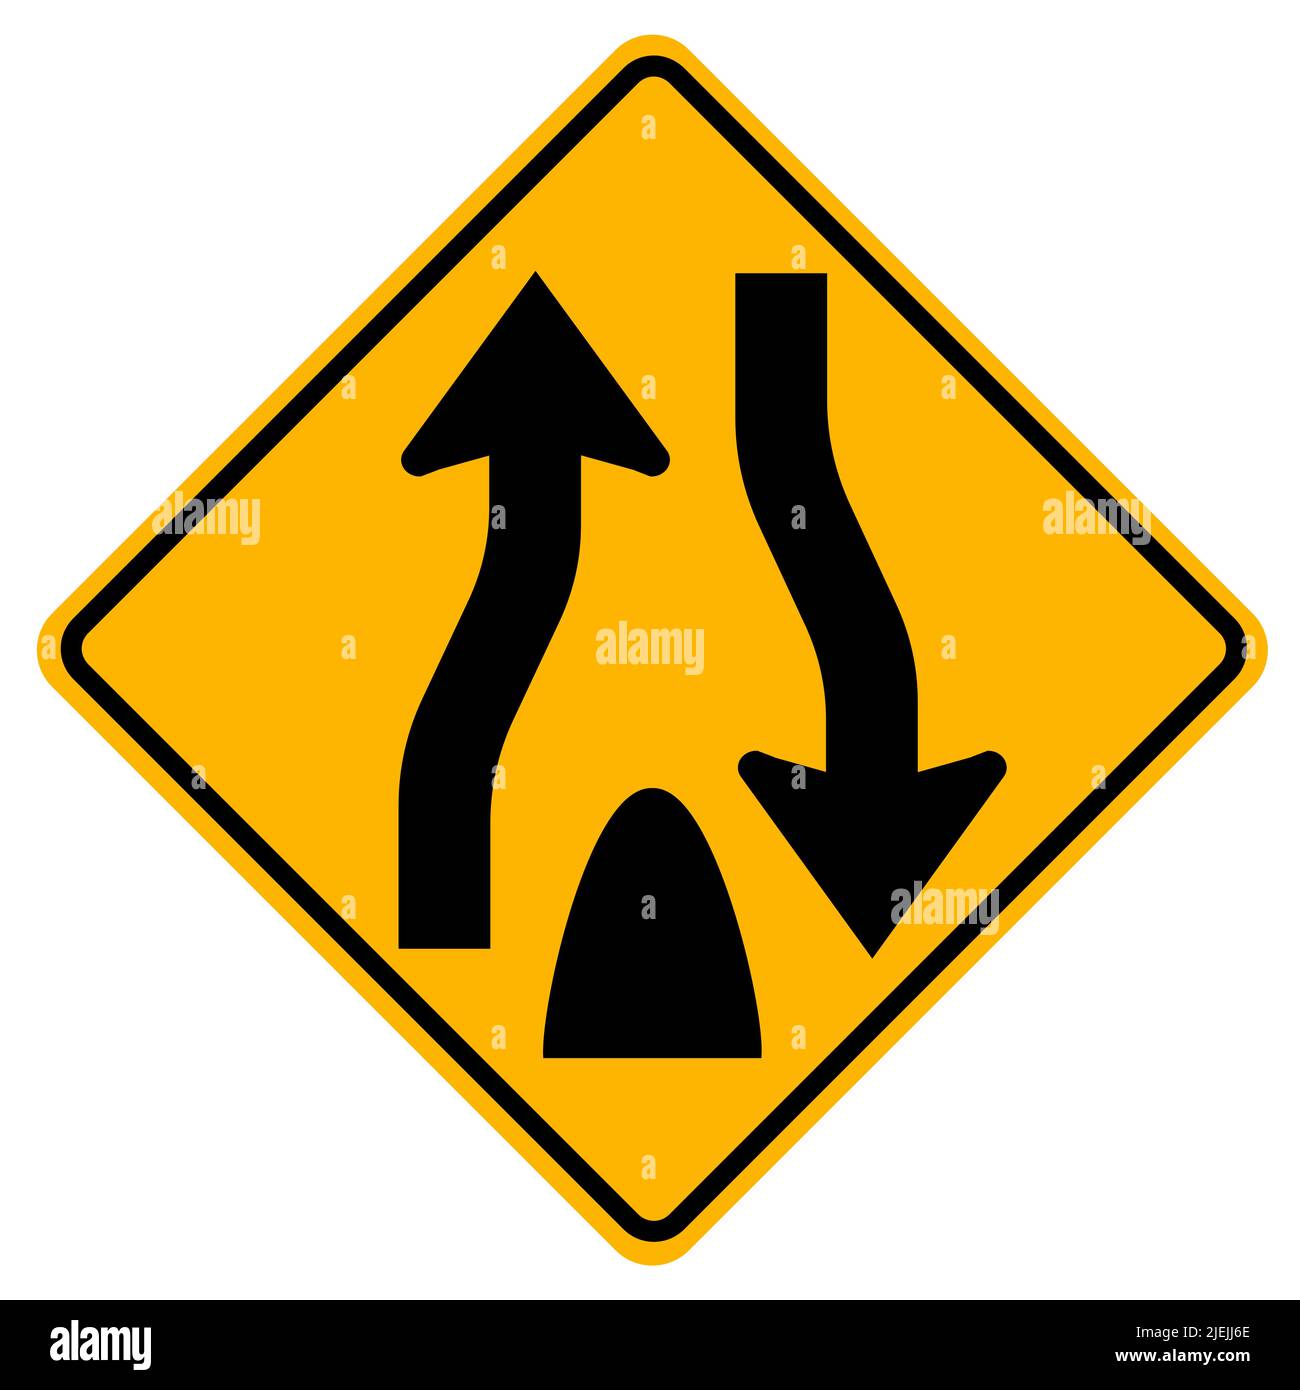 Warning signs Divided road begins on white background Stock Vector